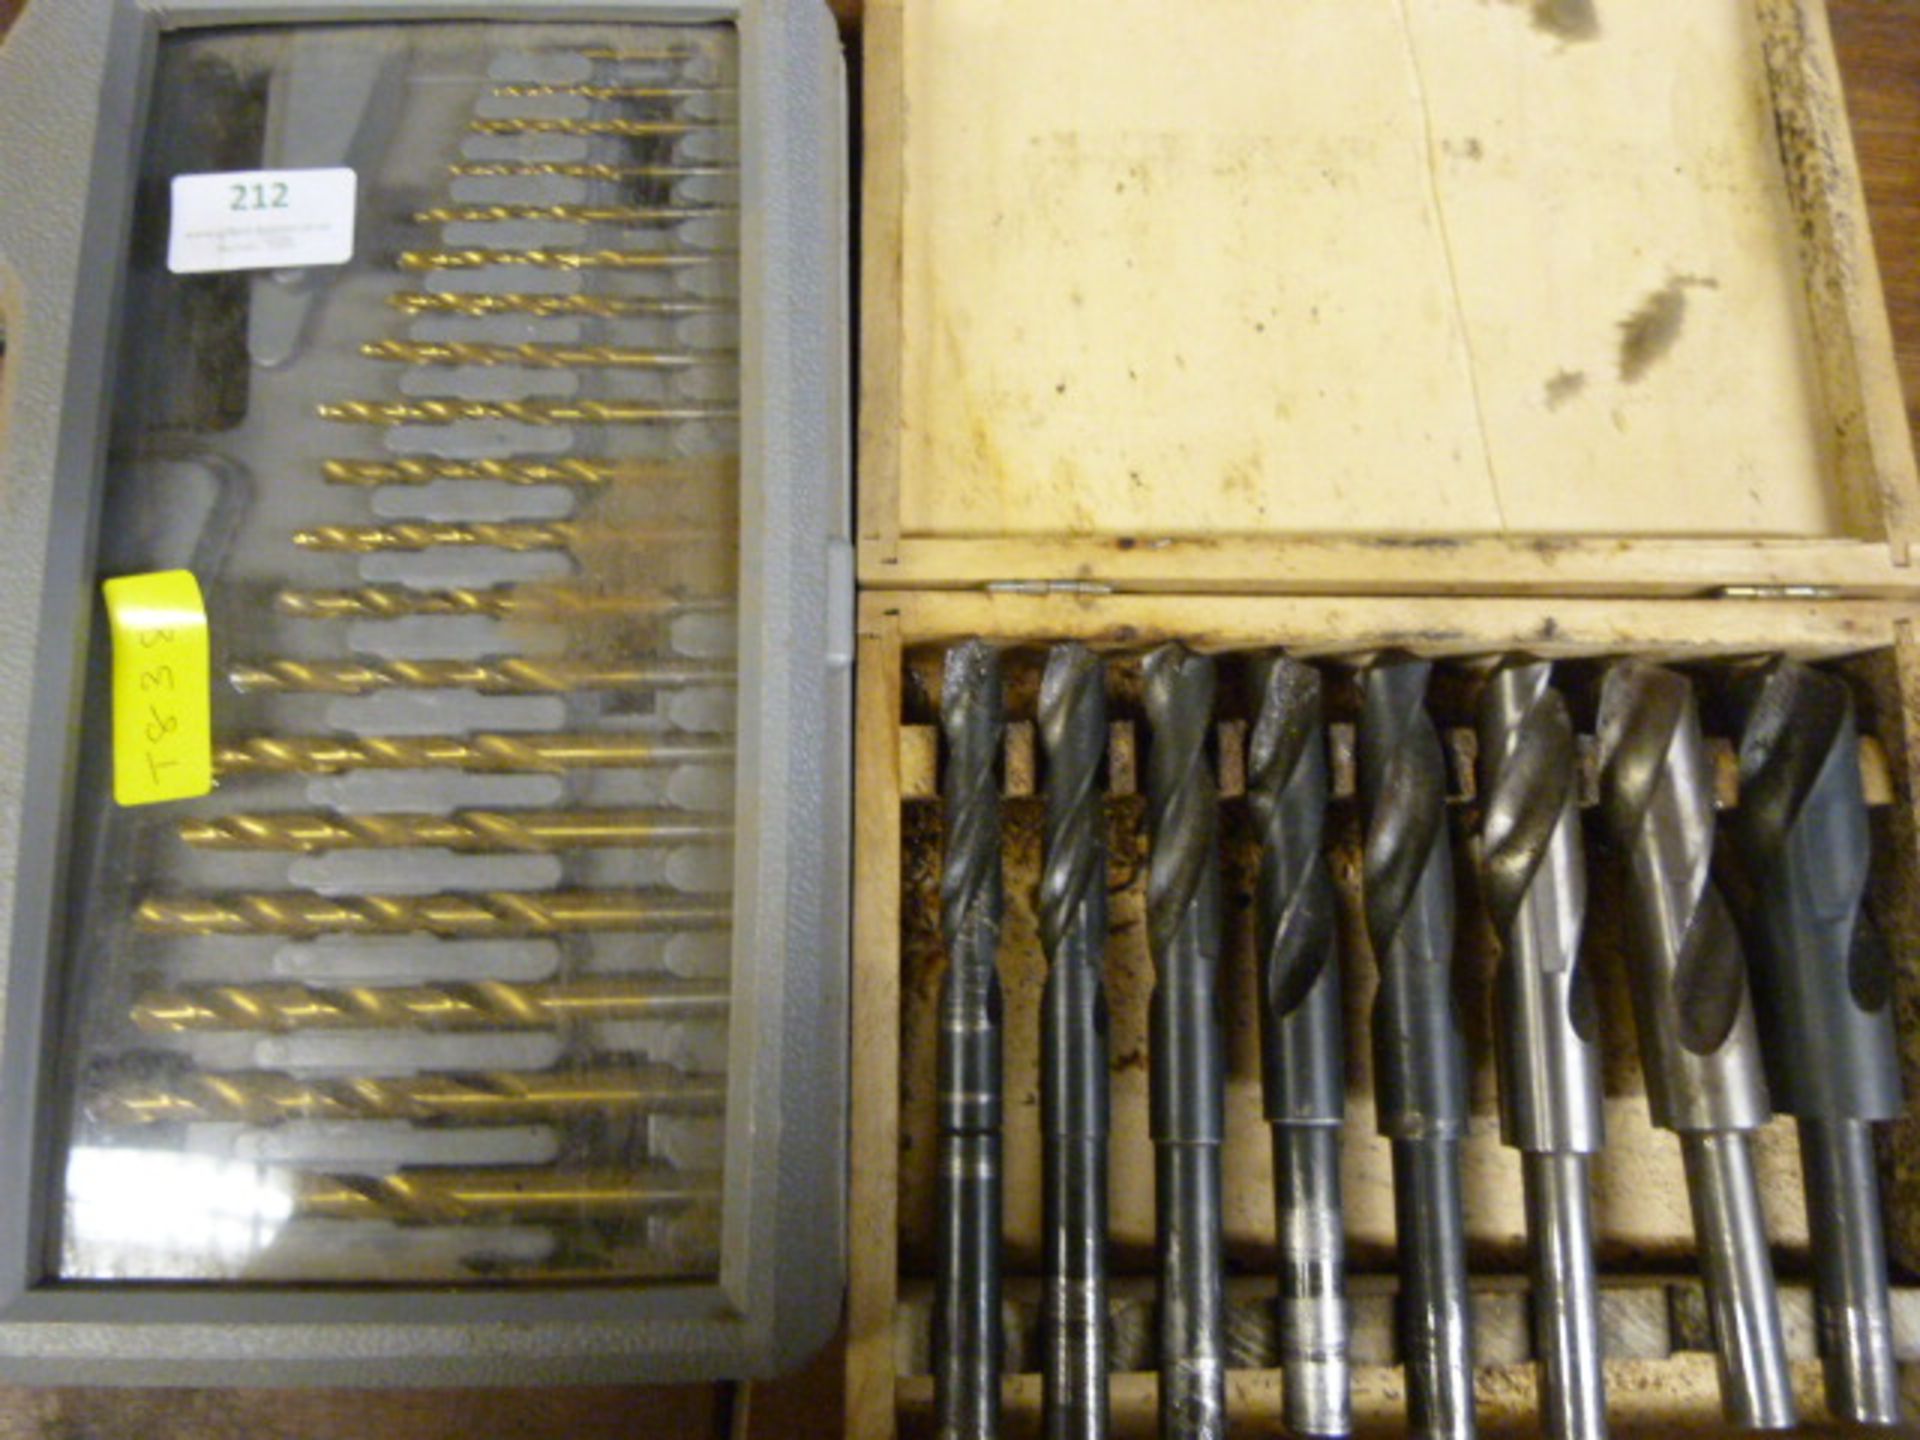 Two Sets of Drill Bits